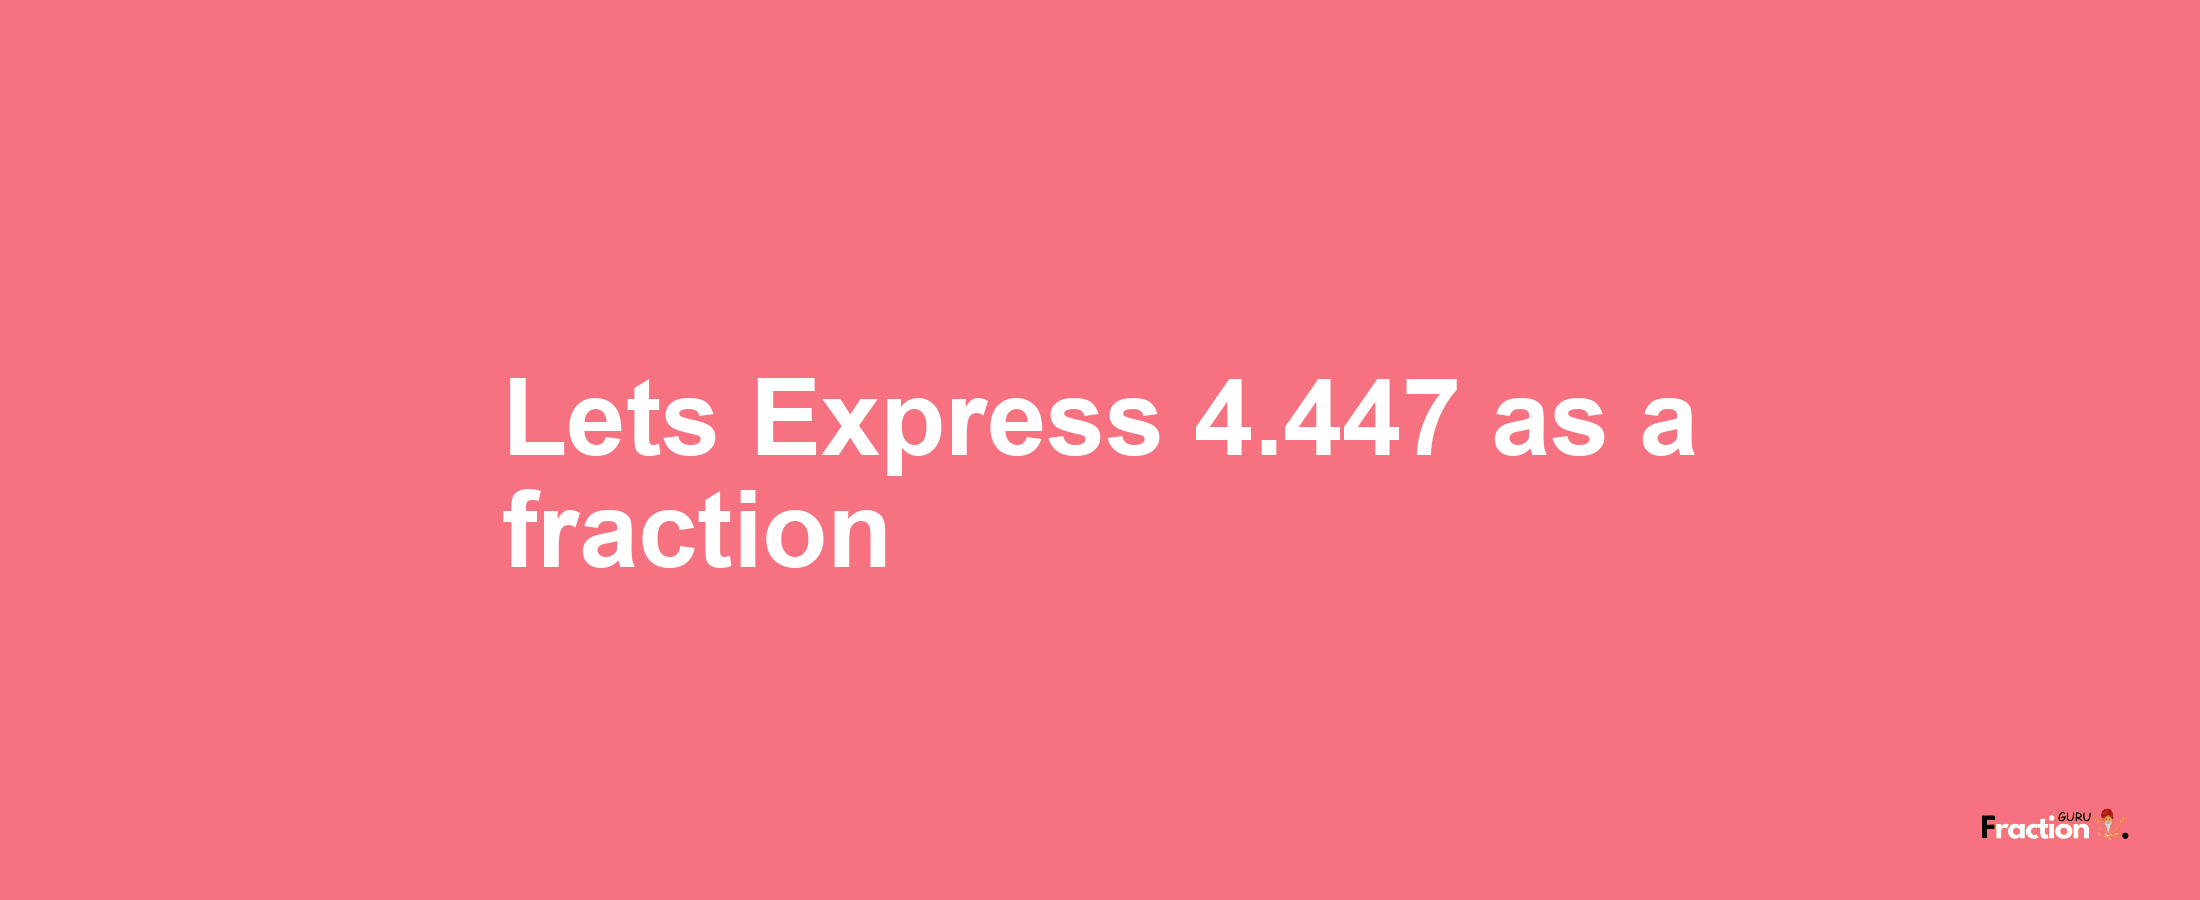 Lets Express 4.447 as afraction